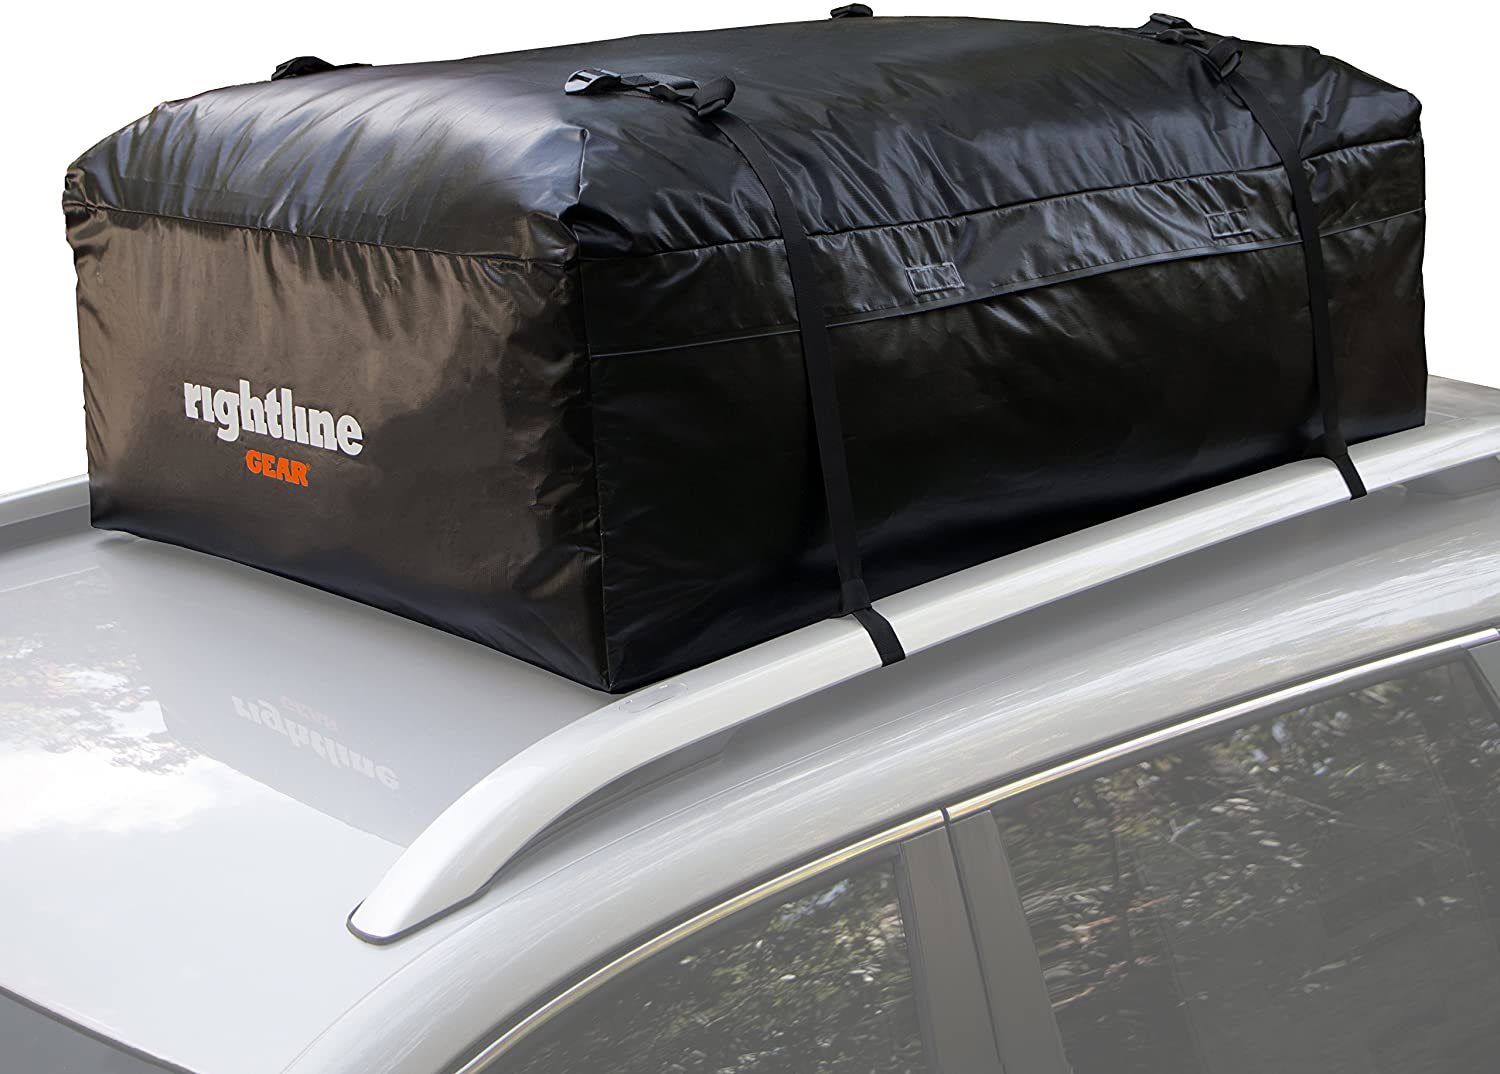 Rightline Gear Ace Jr Top Carrier, 9 cu ft Sized for Compact Cars, Weatherproof, Attaches With or Without Roof Rack